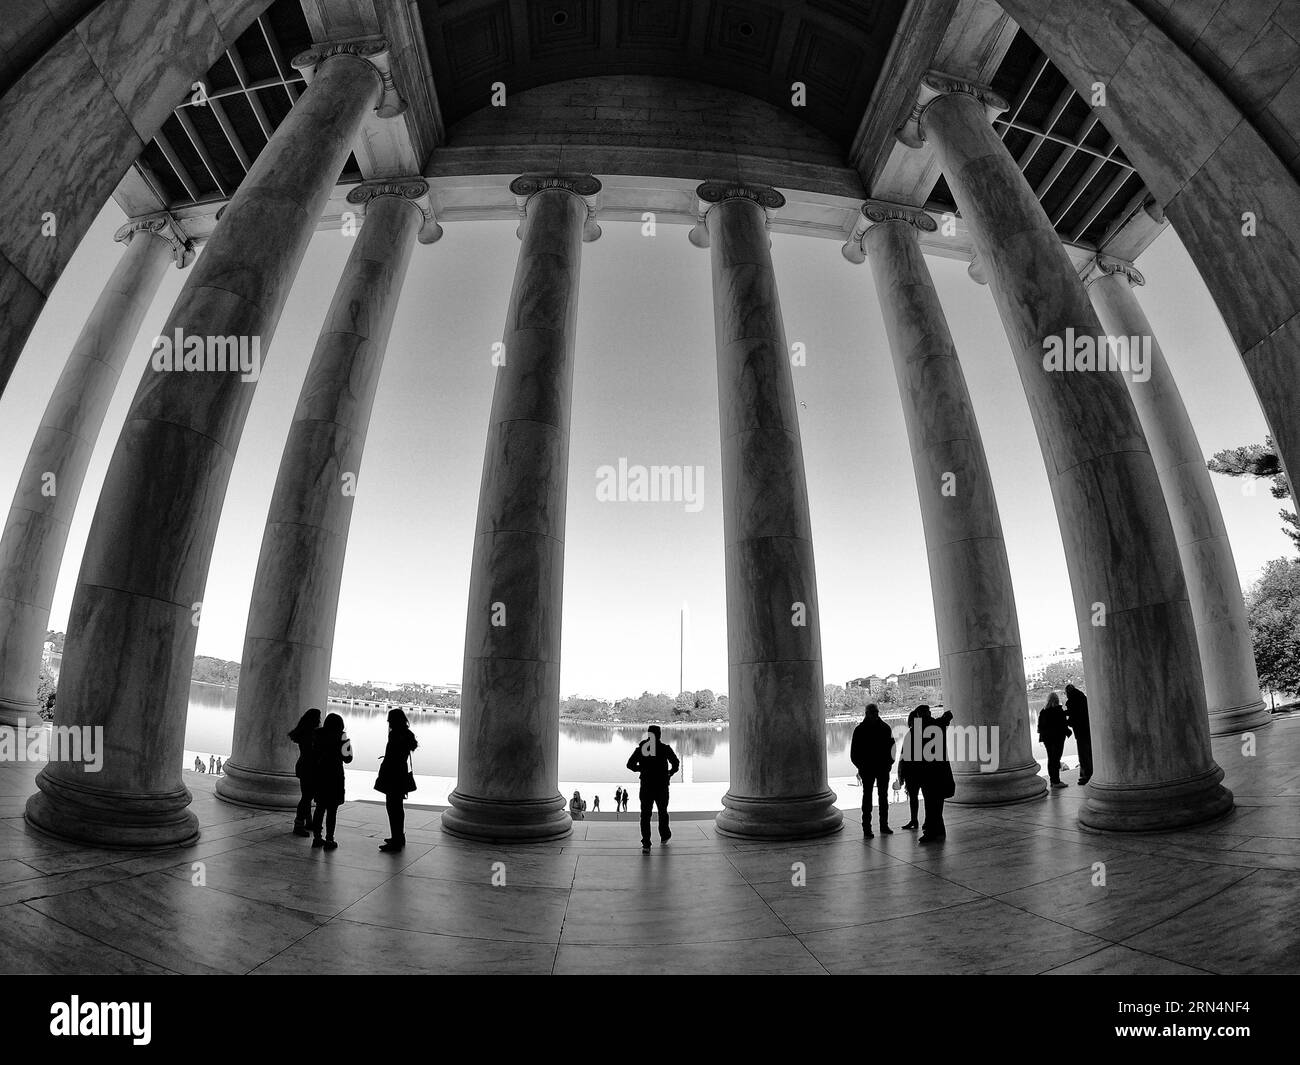 WASHINGTON DC, United States — A black and white photograph of the Jefferson Memorial. The Jefferson Memorial stands as an iconic tribute to the third U.S. President, Thomas Jefferson. Overlooking the Tidal Basin, this neoclassical monument is a testament to Jefferson's contributions to the founding principles of the nation. Stock Photo